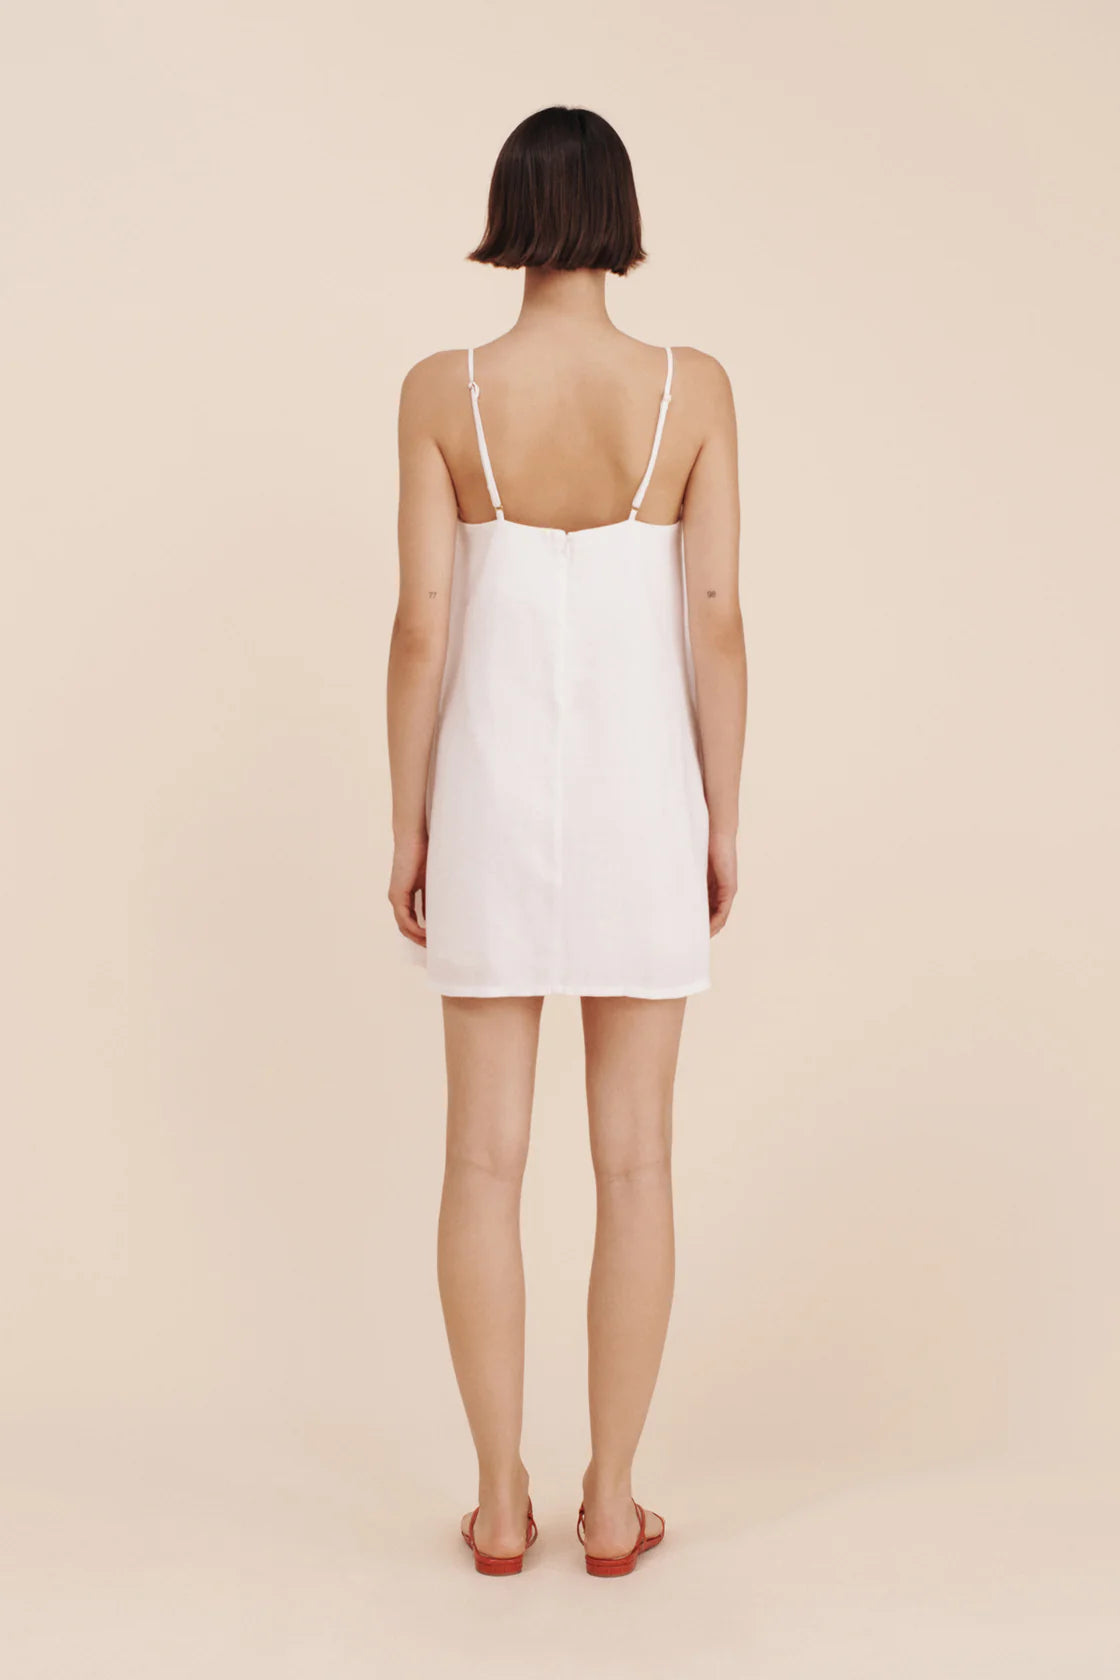 Maggie Dress in Ivory